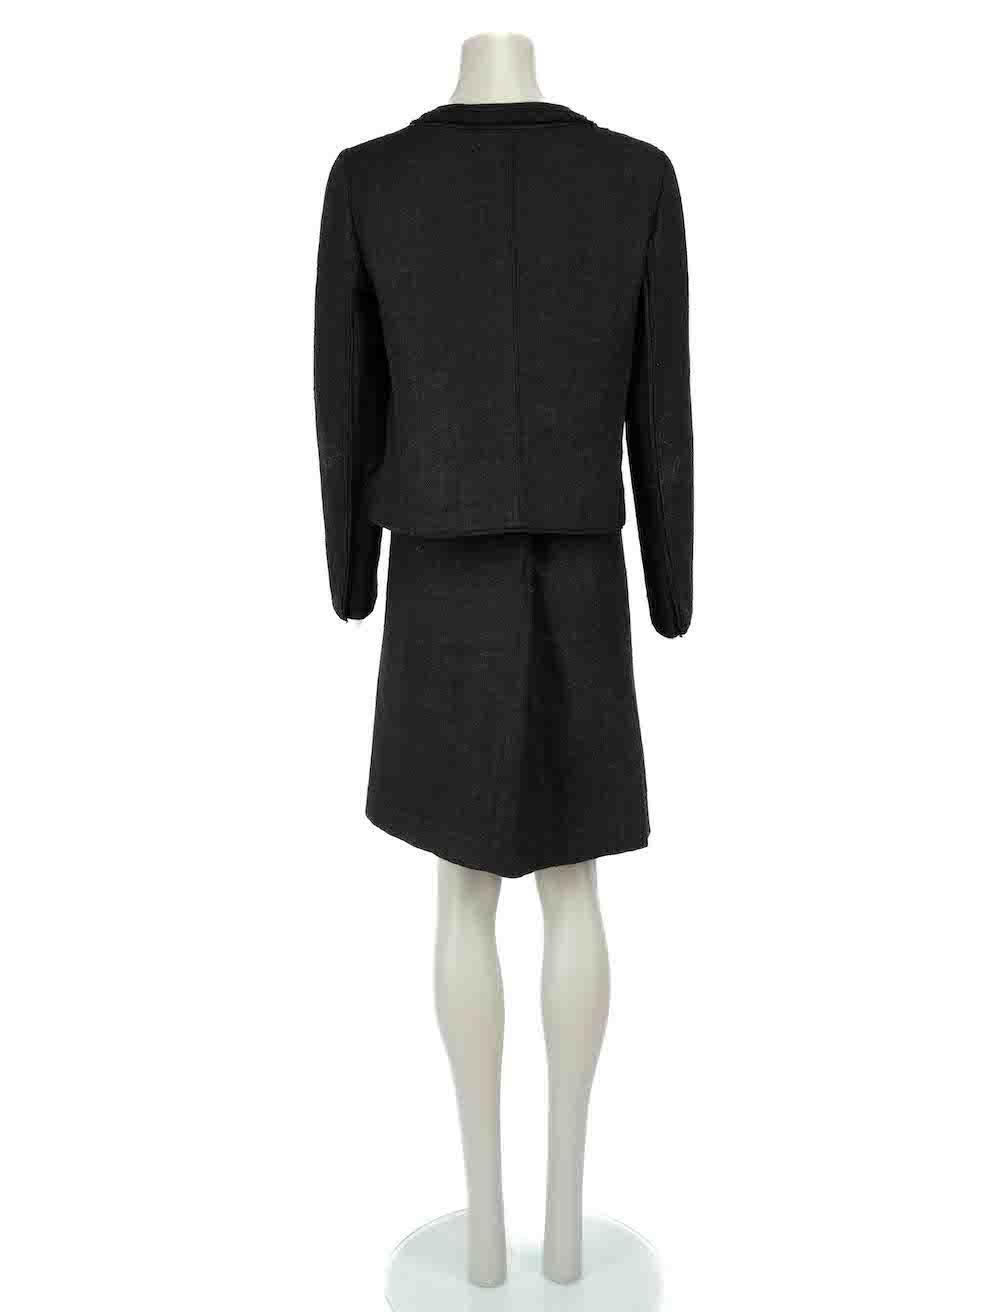 Prada Black Bow Detail Matching Jacket & Skirt Set Size L In Good Condition For Sale In London, GB